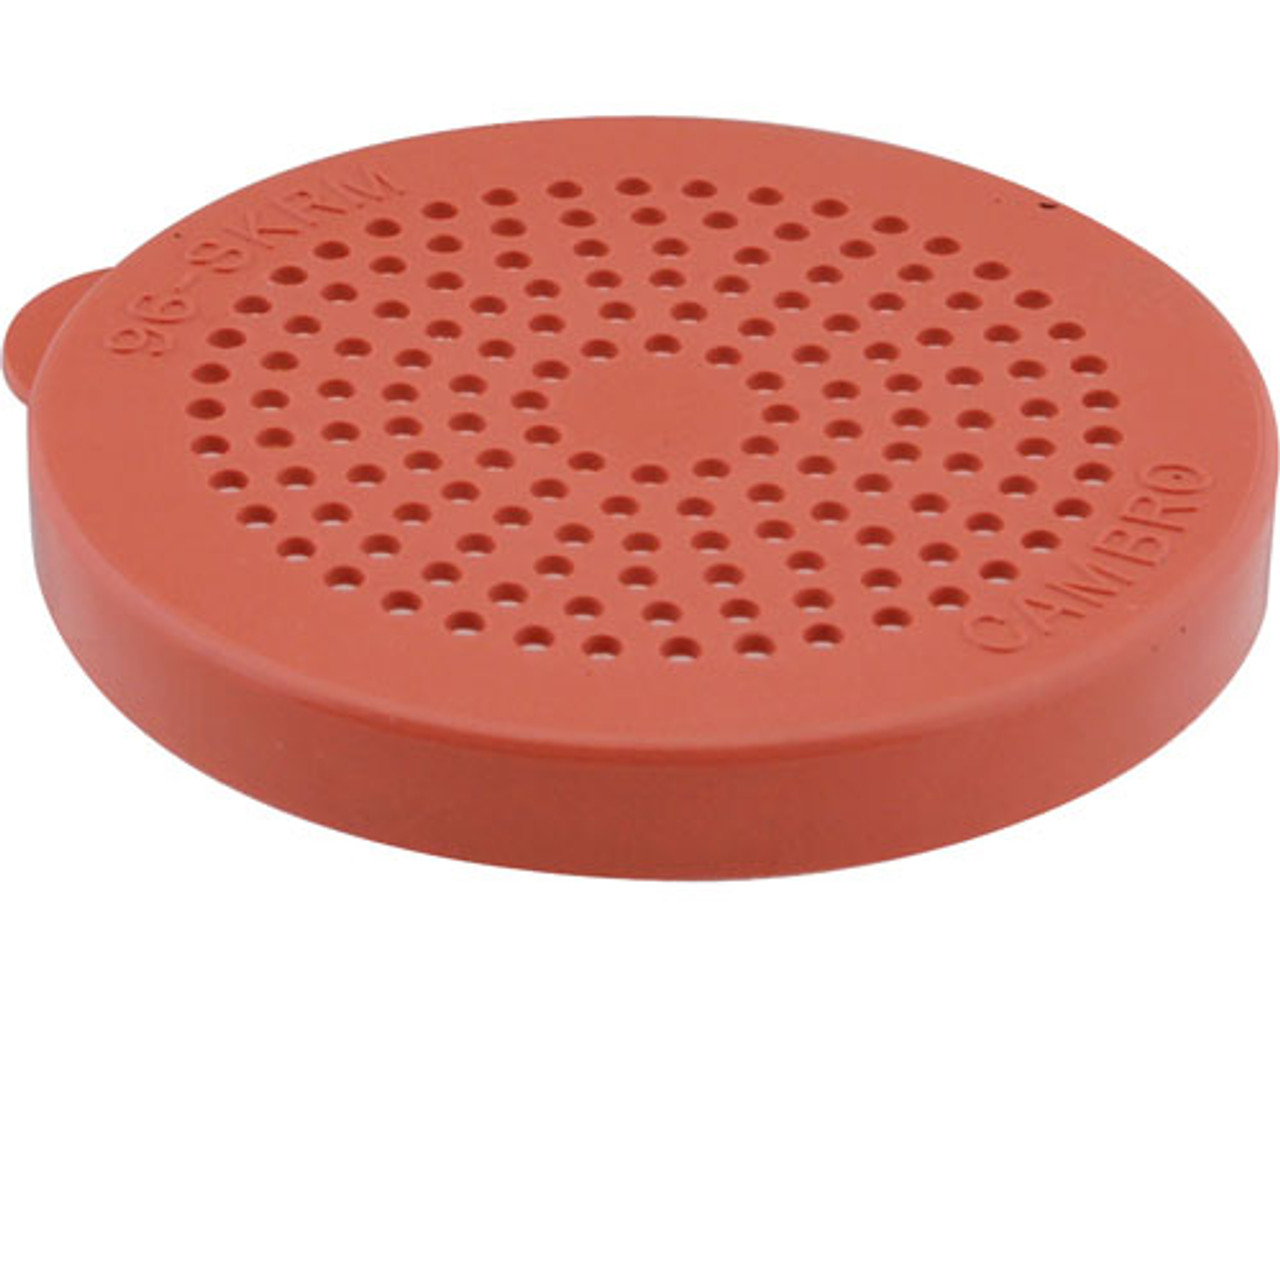 Replc Lid Med -408 Rose - Replacement Part For Cambro 96SKRLM408